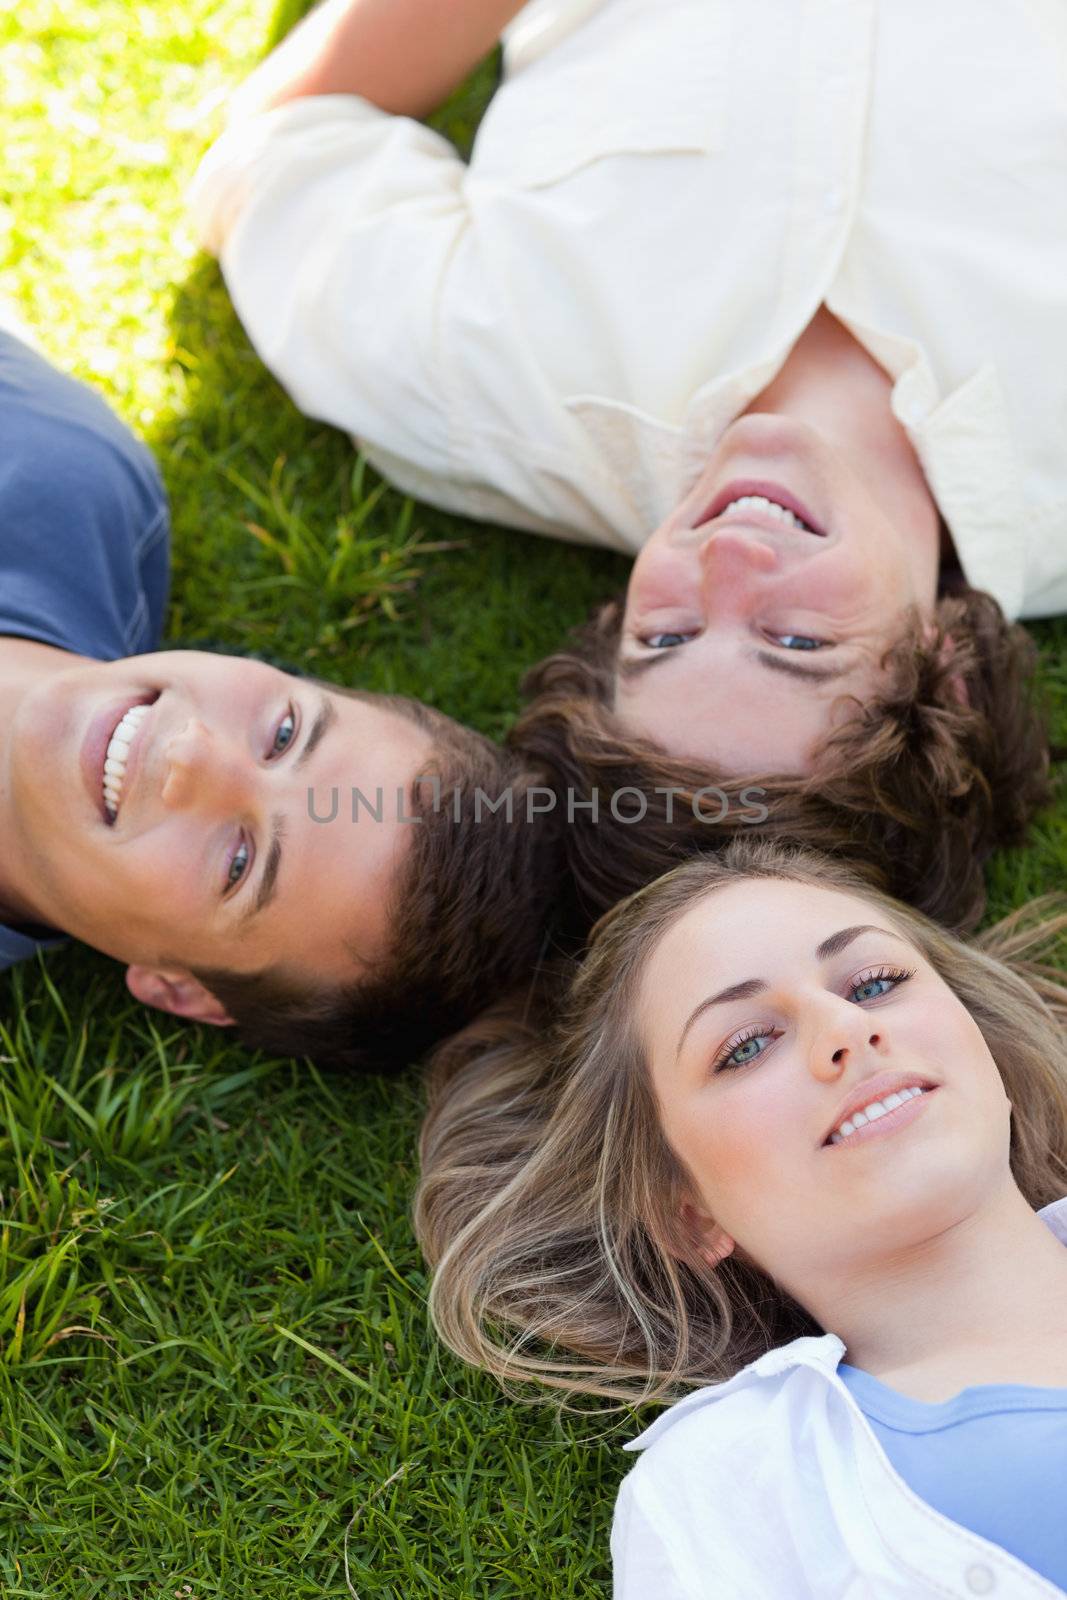 Three students resting together while looking at camera in the grass